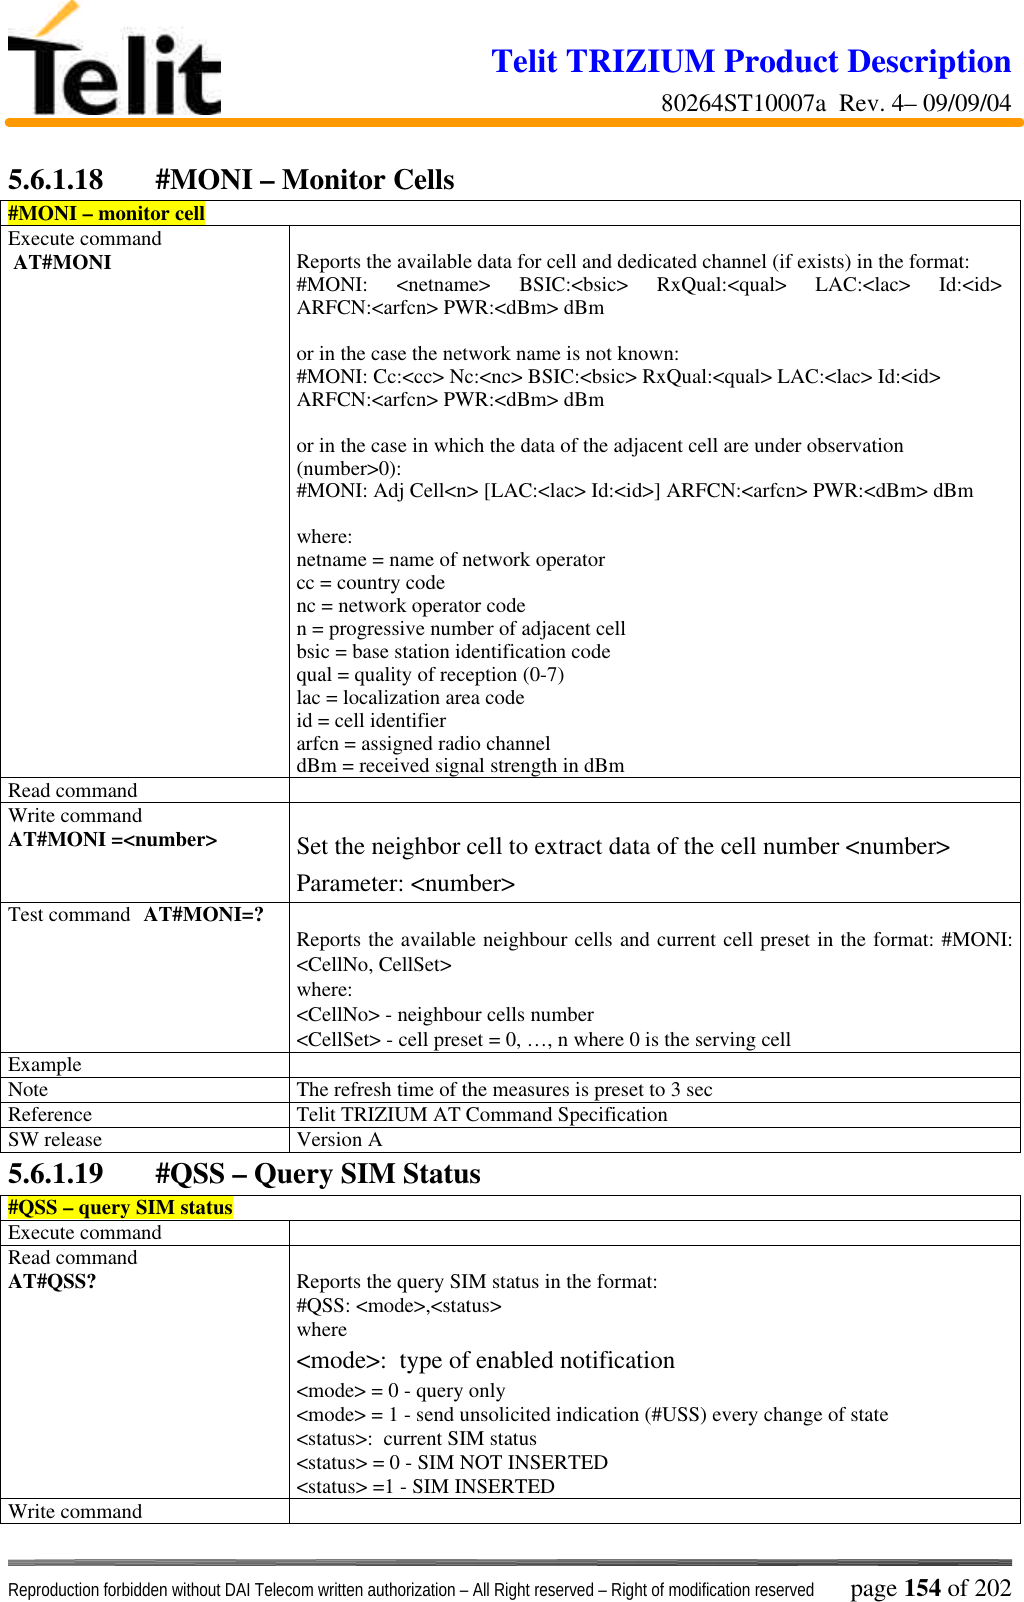 Telit TRIZIUM Product Description80264ST10007a  Rev. 4– 09/09/04Reproduction forbidden without DAI Telecom written authorization – All Right reserved – Right of modification reserved page 154 of 2025.6.1.18 #MONI – Monitor Cells#MONI – monitor cellExecute command AT#MONI Reports the available data for cell and dedicated channel (if exists) in the format:#MONI: &lt;netname&gt; BSIC:&lt;bsic&gt; RxQual:&lt;qual&gt; LAC:&lt;lac&gt; Id:&lt;id&gt;ARFCN:&lt;arfcn&gt; PWR:&lt;dBm&gt; dBmor in the case the network name is not known:#MONI: Cc:&lt;cc&gt; Nc:&lt;nc&gt; BSIC:&lt;bsic&gt; RxQual:&lt;qual&gt; LAC:&lt;lac&gt; Id:&lt;id&gt;ARFCN:&lt;arfcn&gt; PWR:&lt;dBm&gt; dBmor in the case in which the data of the adjacent cell are under observation(number&gt;0):#MONI: Adj Cell&lt;n&gt; [LAC:&lt;lac&gt; Id:&lt;id&gt;] ARFCN:&lt;arfcn&gt; PWR:&lt;dBm&gt; dBmwhere:netname = name of network operatorcc = country codenc = network operator coden = progressive number of adjacent cellbsic = base station identification codequal = quality of reception (0-7)lac = localization area codeid = cell identifierarfcn = assigned radio channeldBm = received signal strength in dBmRead commandWrite commandAT#MONI =&lt;number&gt; Set the neighbor cell to extract data of the cell number &lt;number&gt;Parameter: &lt;number&gt;Test command AT#MONI=? Reports the available neighbour cells and current cell preset in the format: #MONI:&lt;CellNo, CellSet&gt;where:&lt;CellNo&gt; - neighbour cells number&lt;CellSet&gt; - cell preset = 0, …, n where 0 is the serving cellExampleNote The refresh time of the measures is preset to 3 secReference Telit TRIZIUM AT Command SpecificationSW release Version A5.6.1.19 #QSS – Query SIM Status#QSS – query SIM statusExecute commandRead commandAT#QSS? Reports the query SIM status in the format:#QSS: &lt;mode&gt;,&lt;status&gt;where&lt;mode&gt;:  type of enabled notification&lt;mode&gt; = 0 - query only&lt;mode&gt; = 1 - send unsolicited indication (#USS) every change of state&lt;status&gt;:  current SIM status&lt;status&gt; = 0 - SIM NOT INSERTED&lt;status&gt; =1 - SIM INSERTEDWrite command